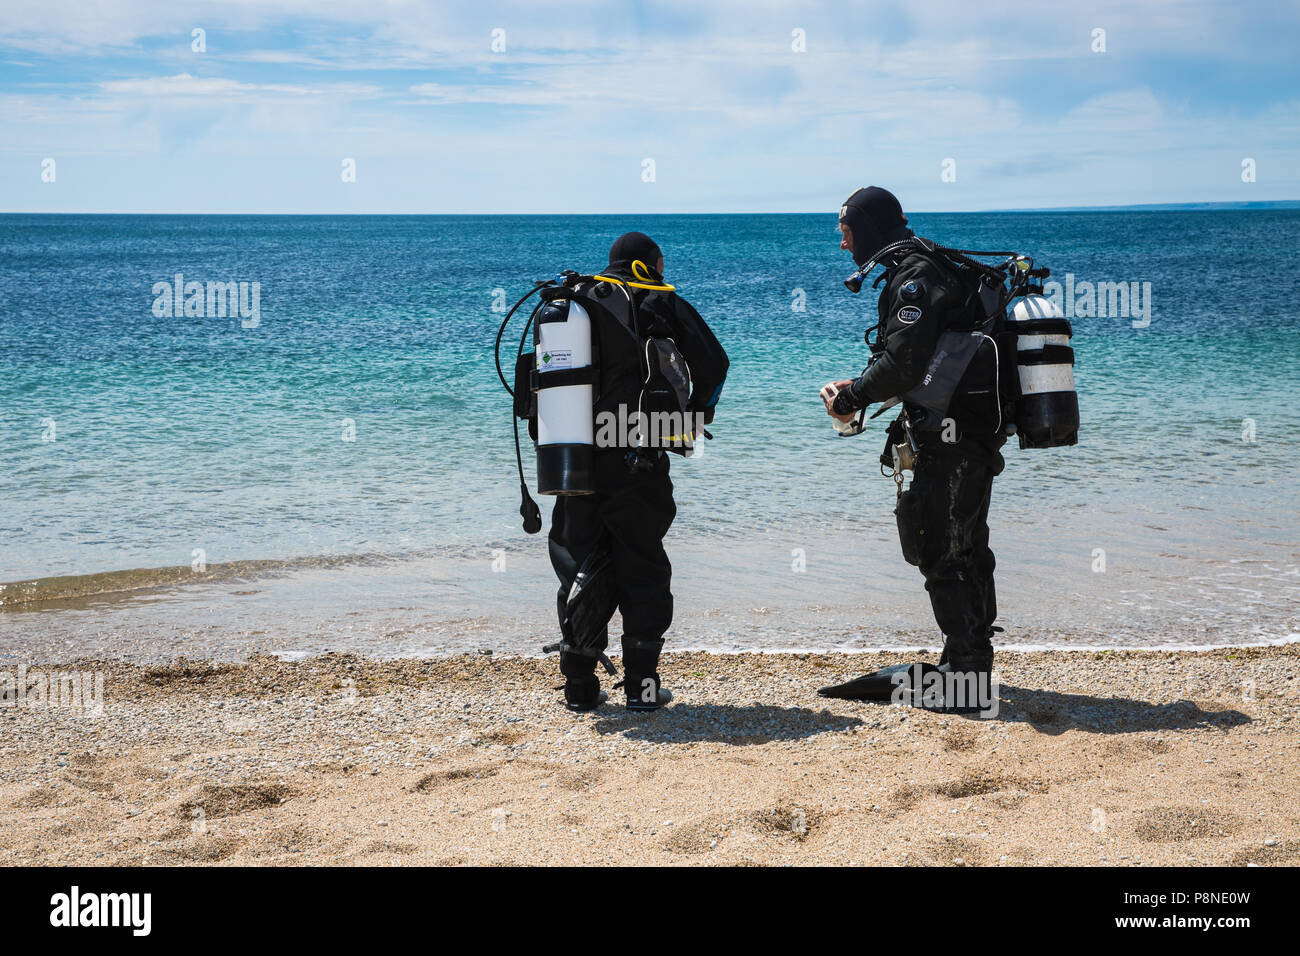 Two deep sea divers getting ready to dive by performing safety checks on their equipment together on a beach with the ocean behind Stock Photo